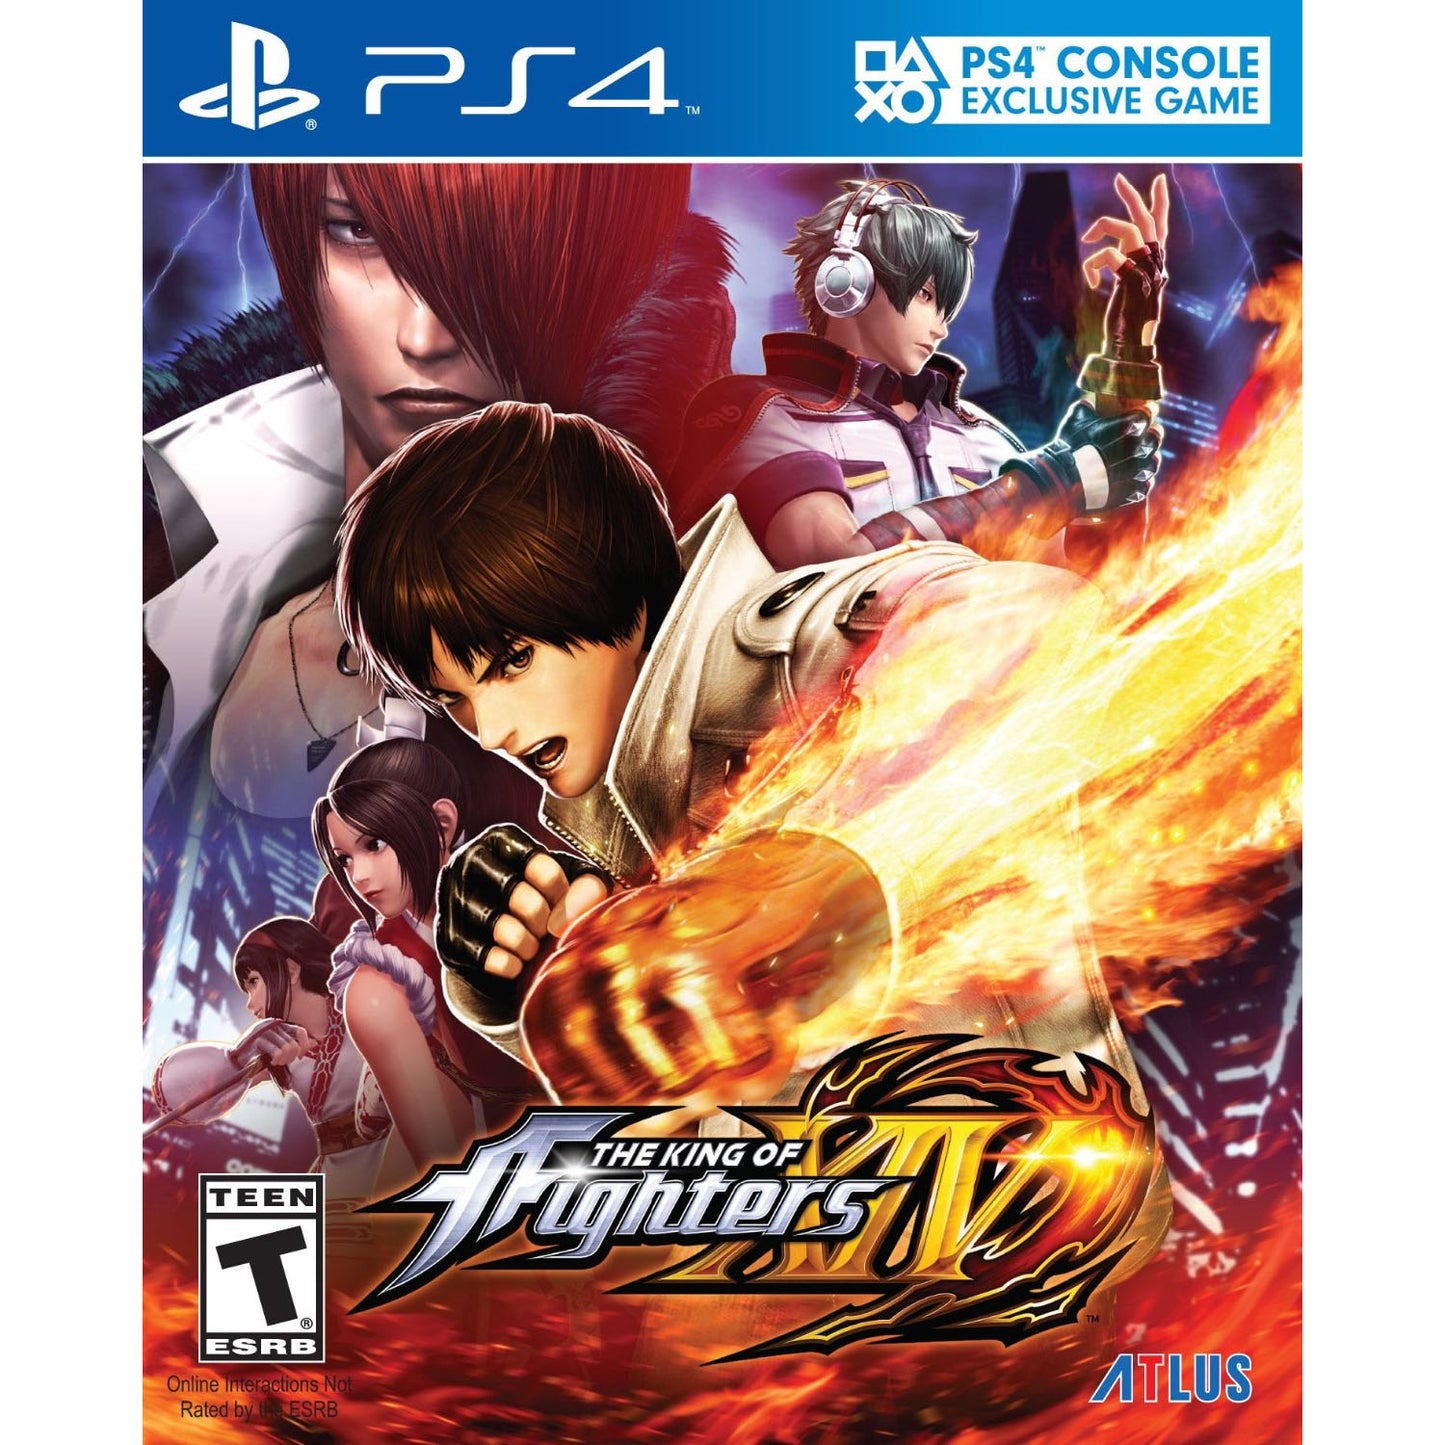 The King Of Fighters XIV for PS4